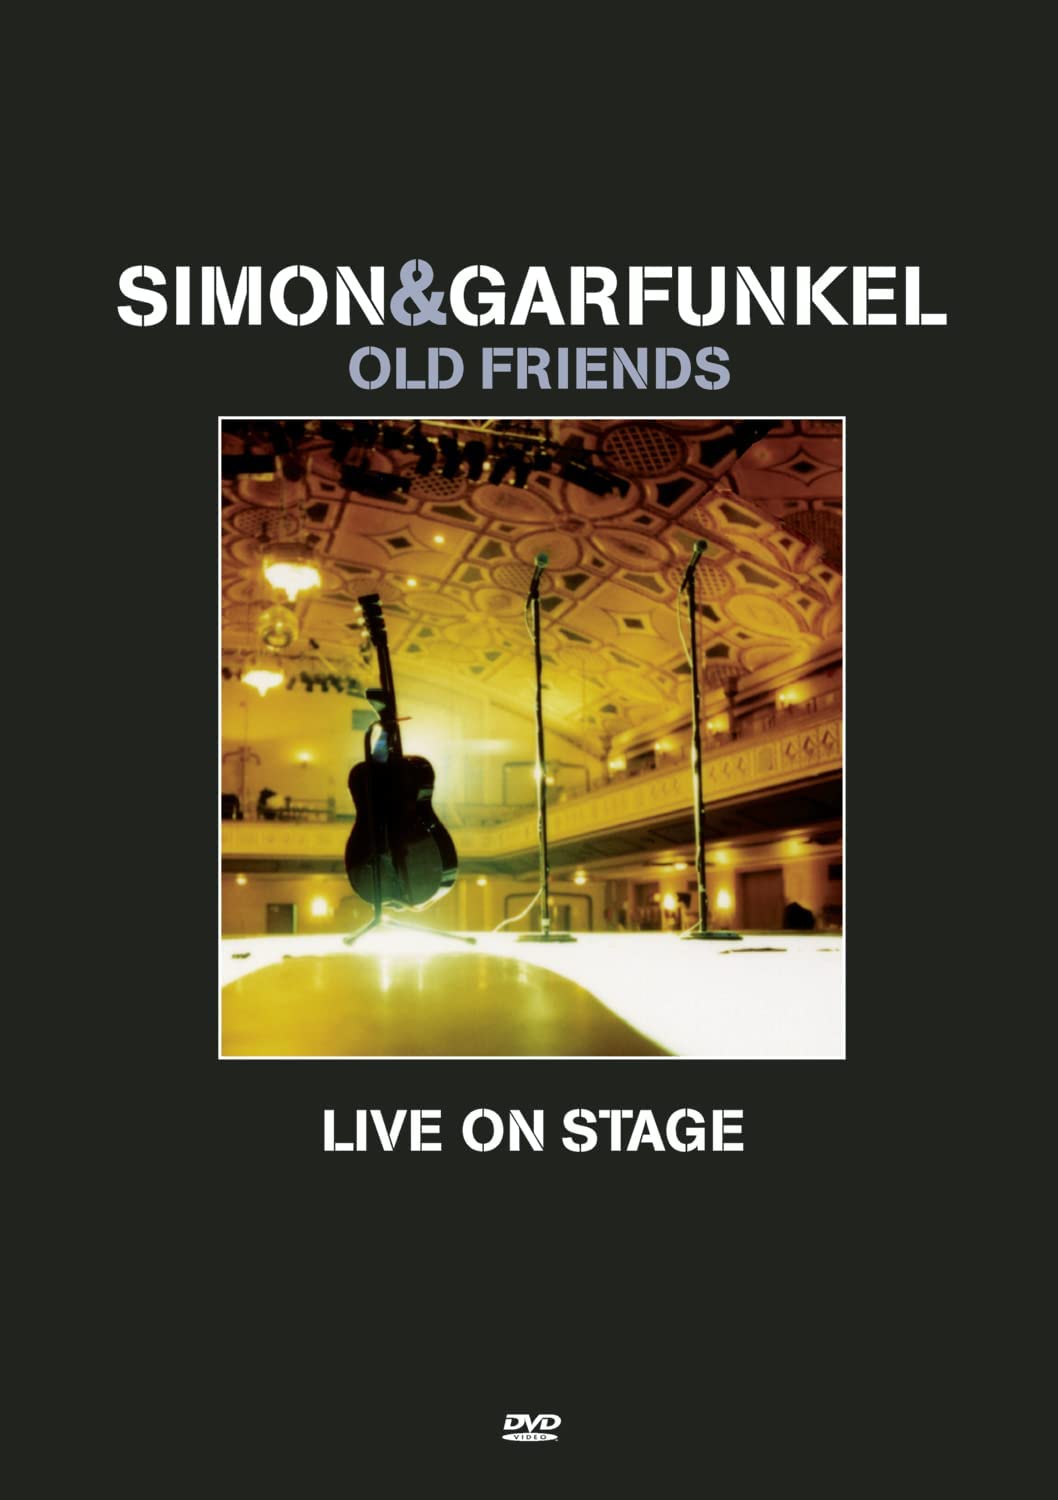 Old Friends - On Stage [Audio CD]